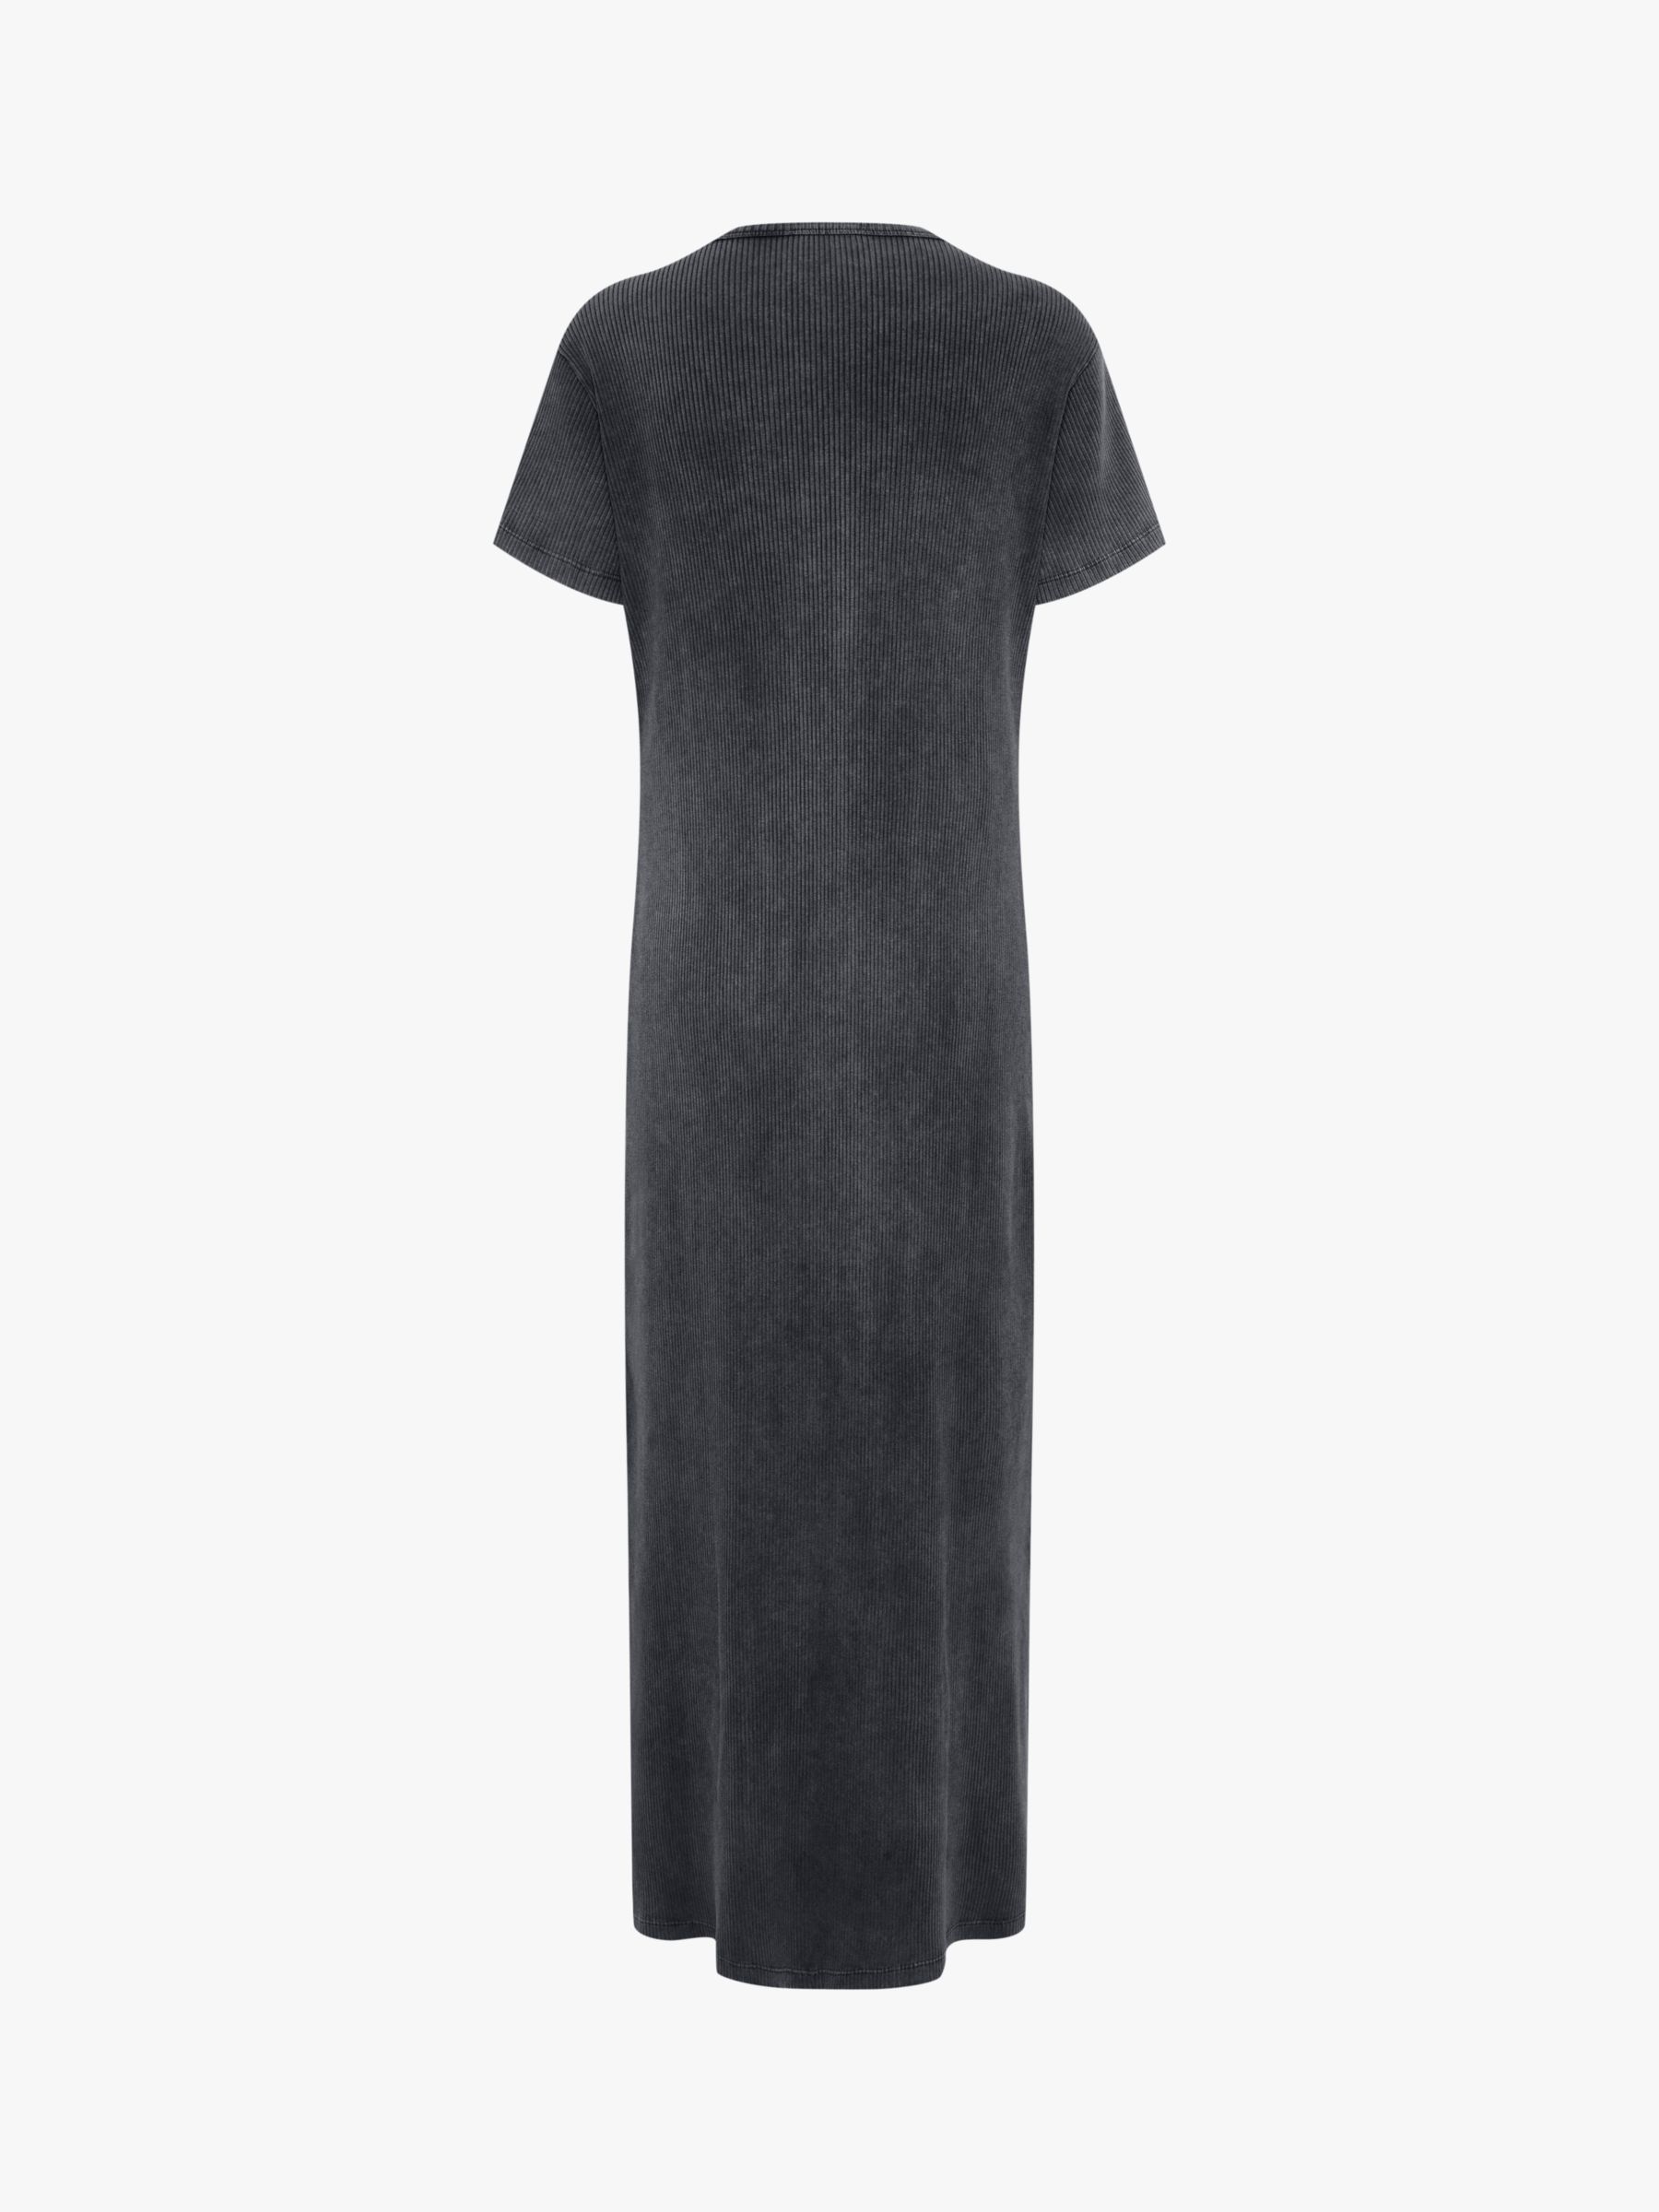 MY ESSENTIAL WARDROBE Ace Ribbed Jersey T-Shirt Maxi Dress, Washed Black, XS